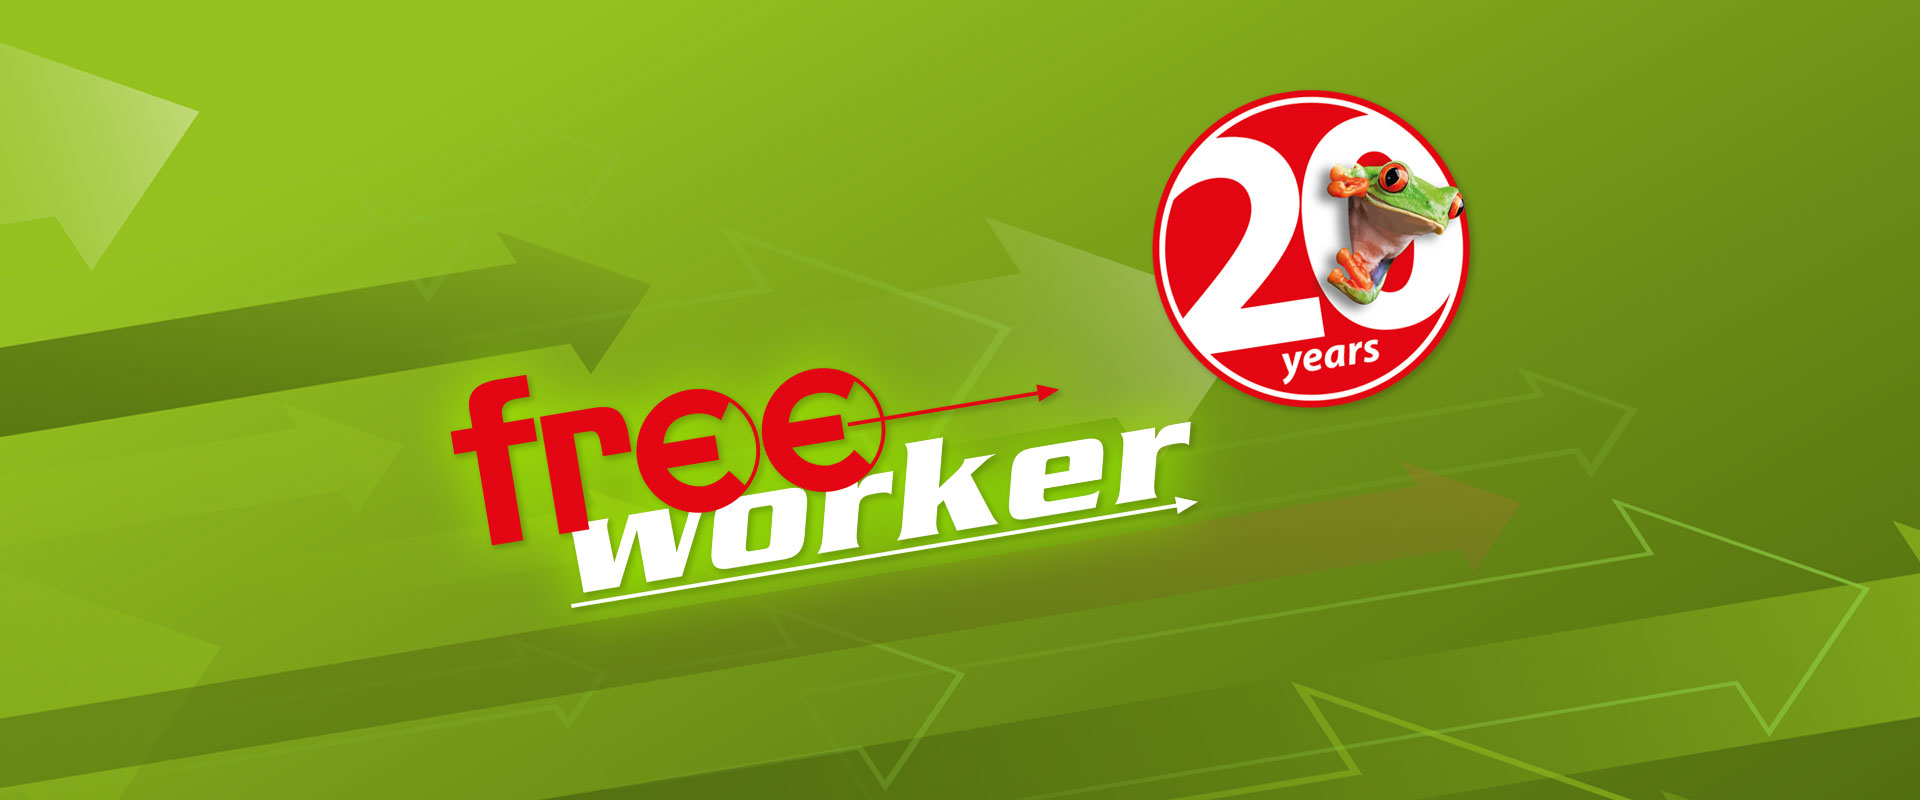 Freeworker - 20 years partner for arborists